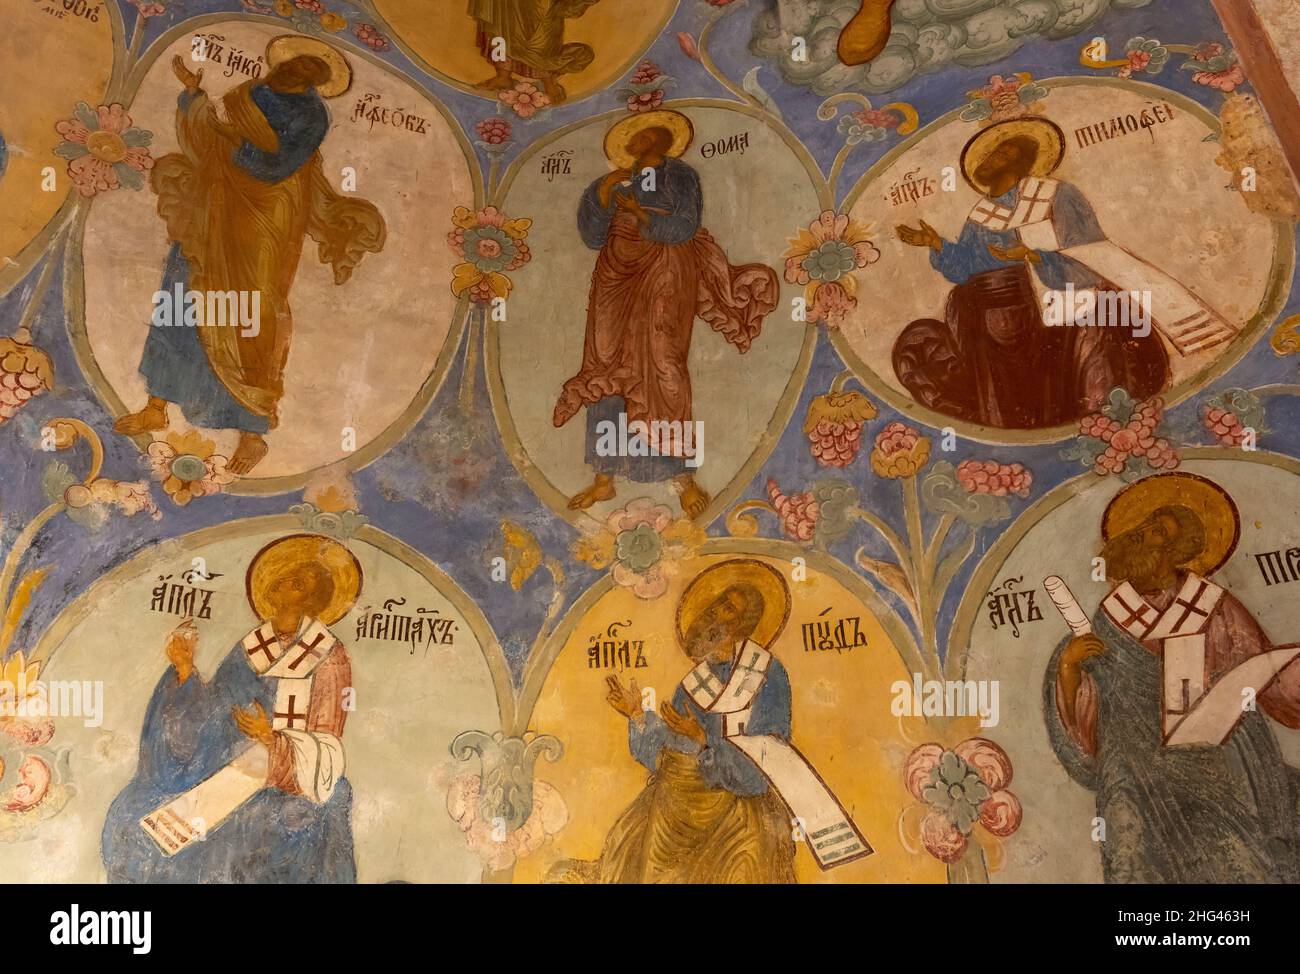 Suzdal, Russia - September 24, 2019: Frescoes in the Transfiguration Cathedral in the Monastery of Spaso-Evfimie in Suzdal, respublika Tartastan, Russ Stock Photo